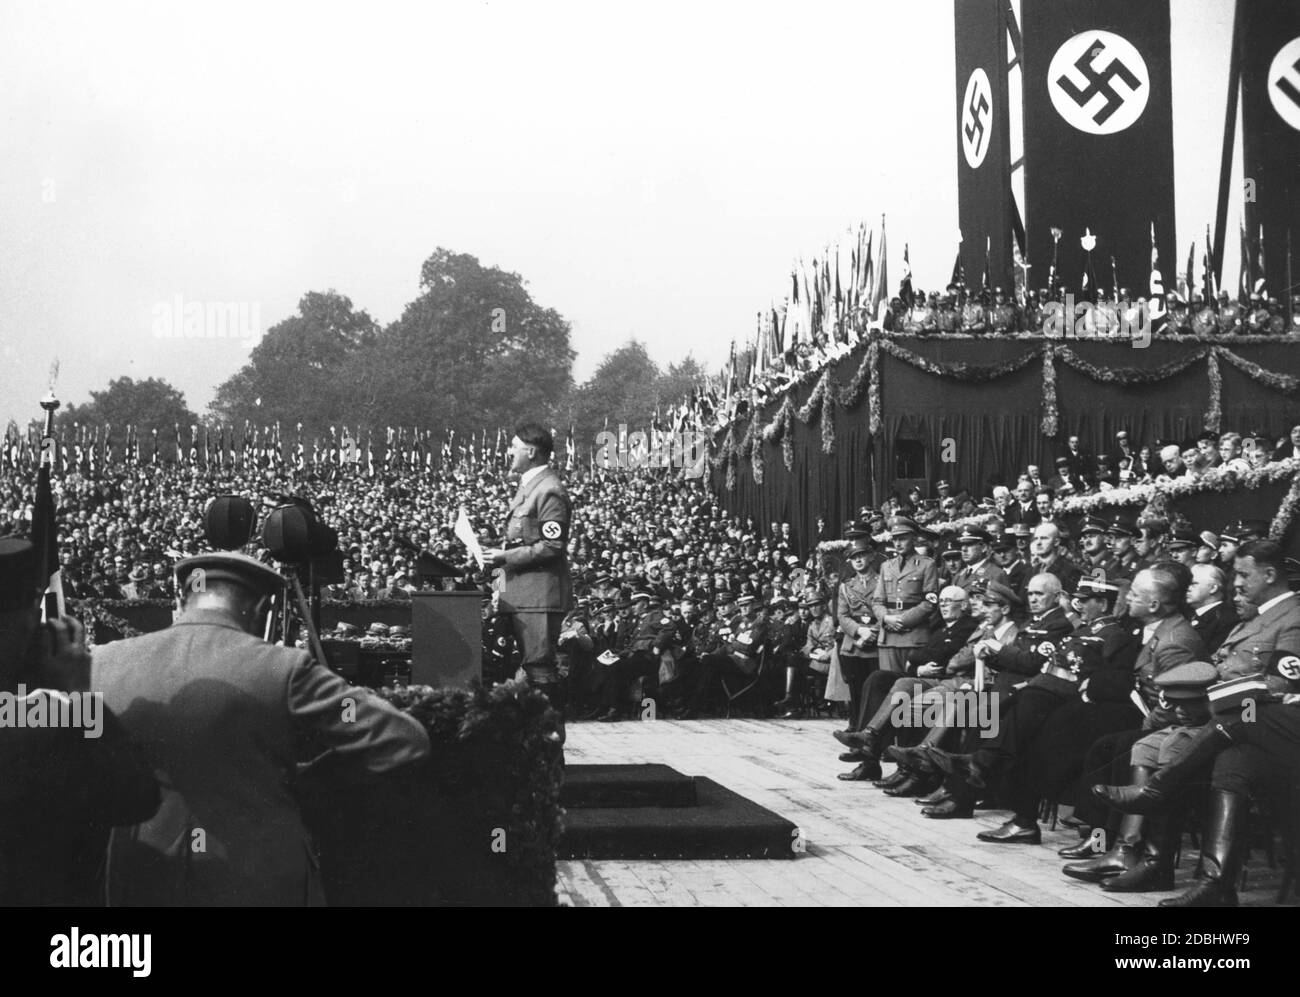 The Day of German Art with foundation stone laying of the Haus der Kunst on 15.10.1933. At the lectern is Adolf Hitler. Stock Photo